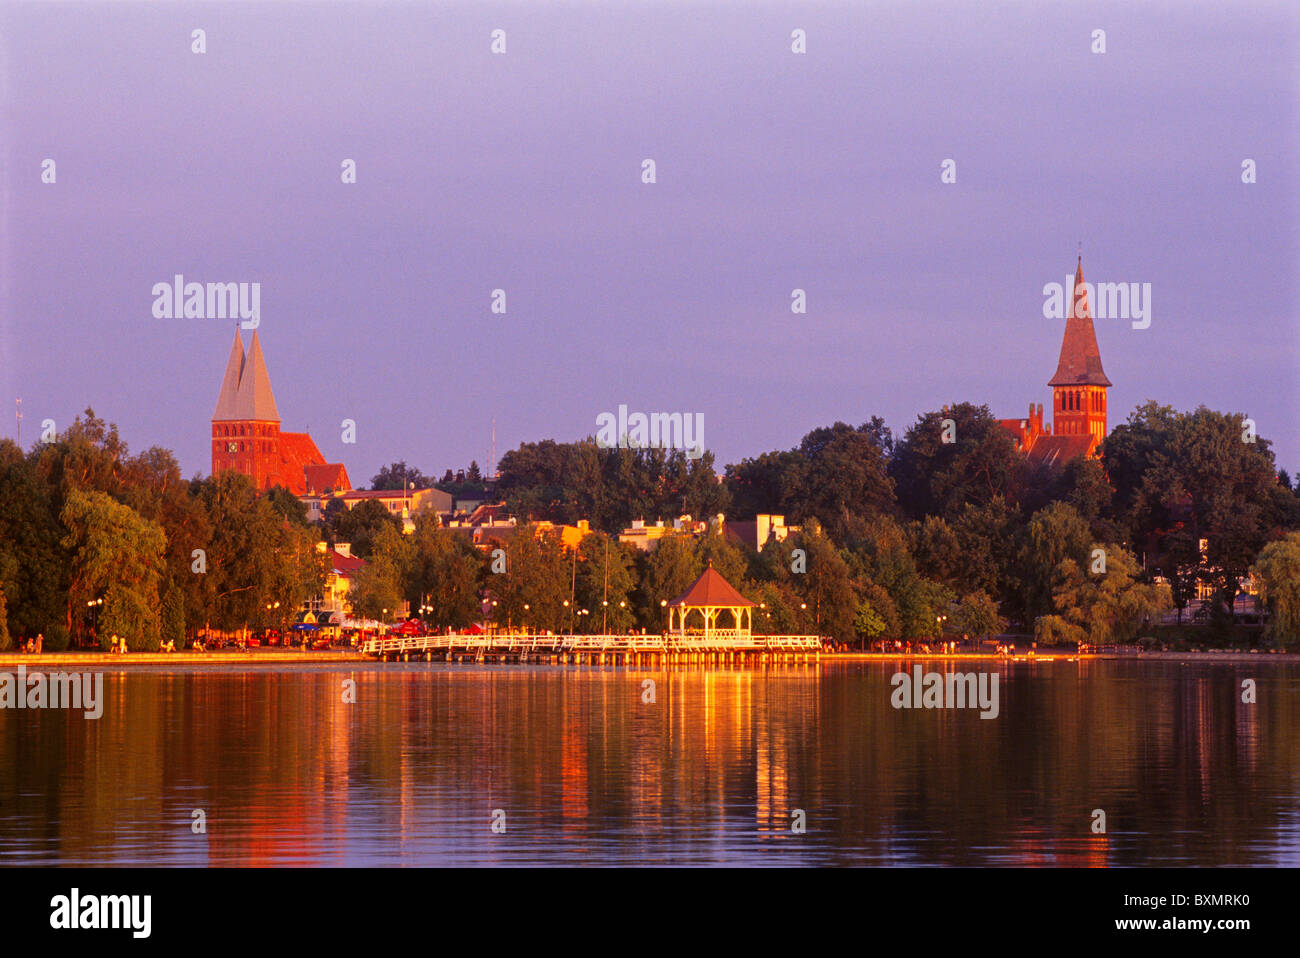 The Old Town of Ostroda with two brick churches across the Lake Drewenz glows in the warm evening light of a masurian summer. Stock Photo